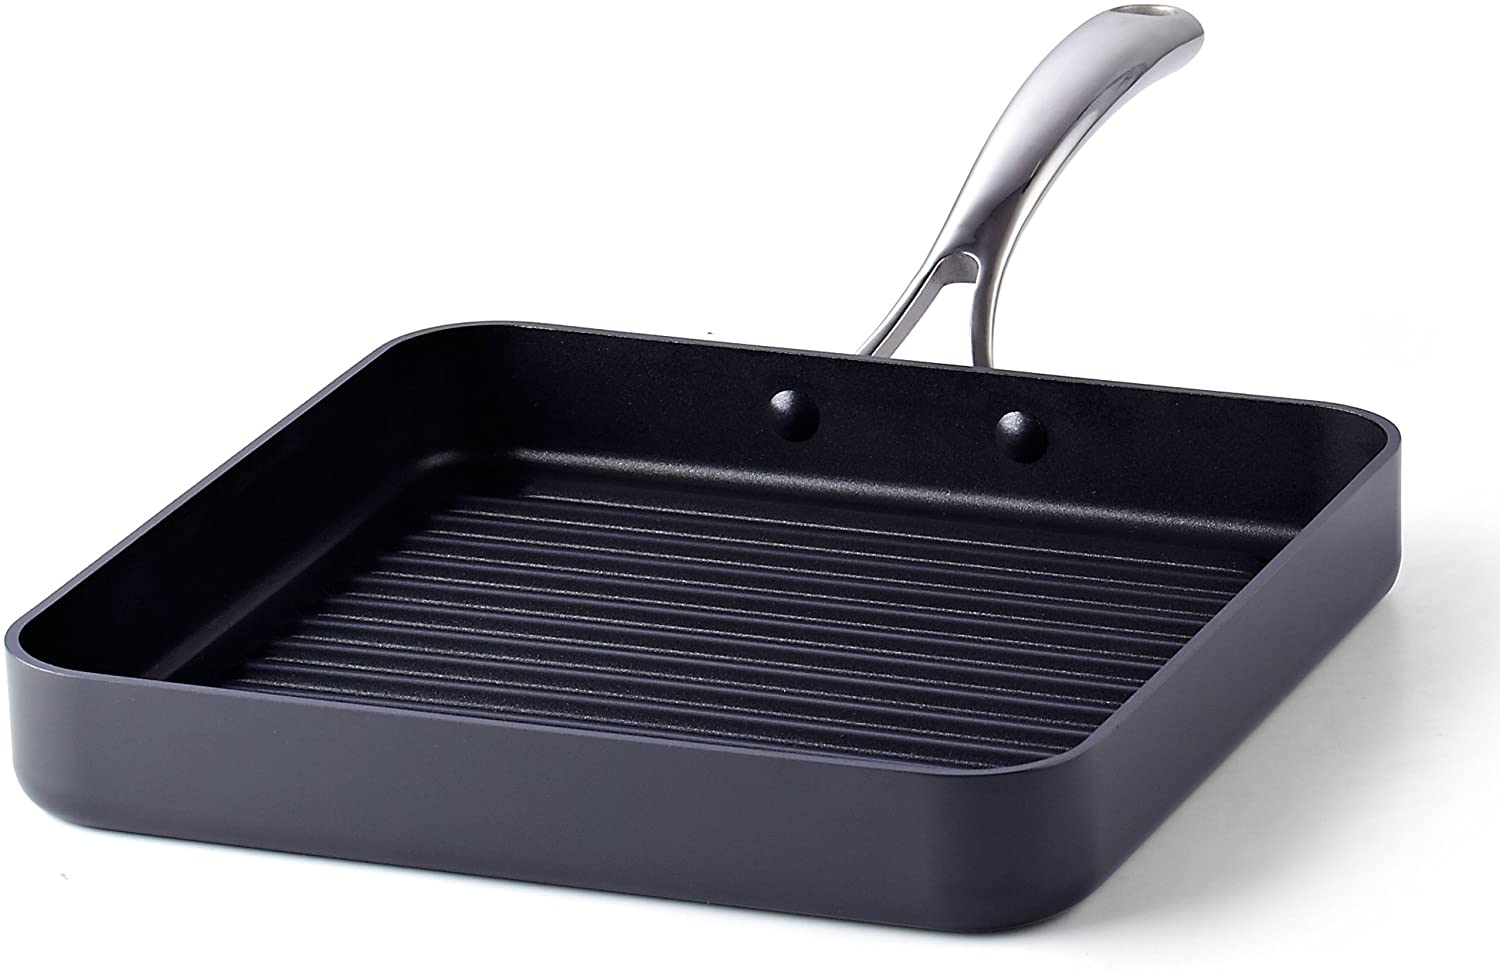 All-Clad HA1 Hard Anodized Nonstick Cookware, Square Griddle, 11 inch